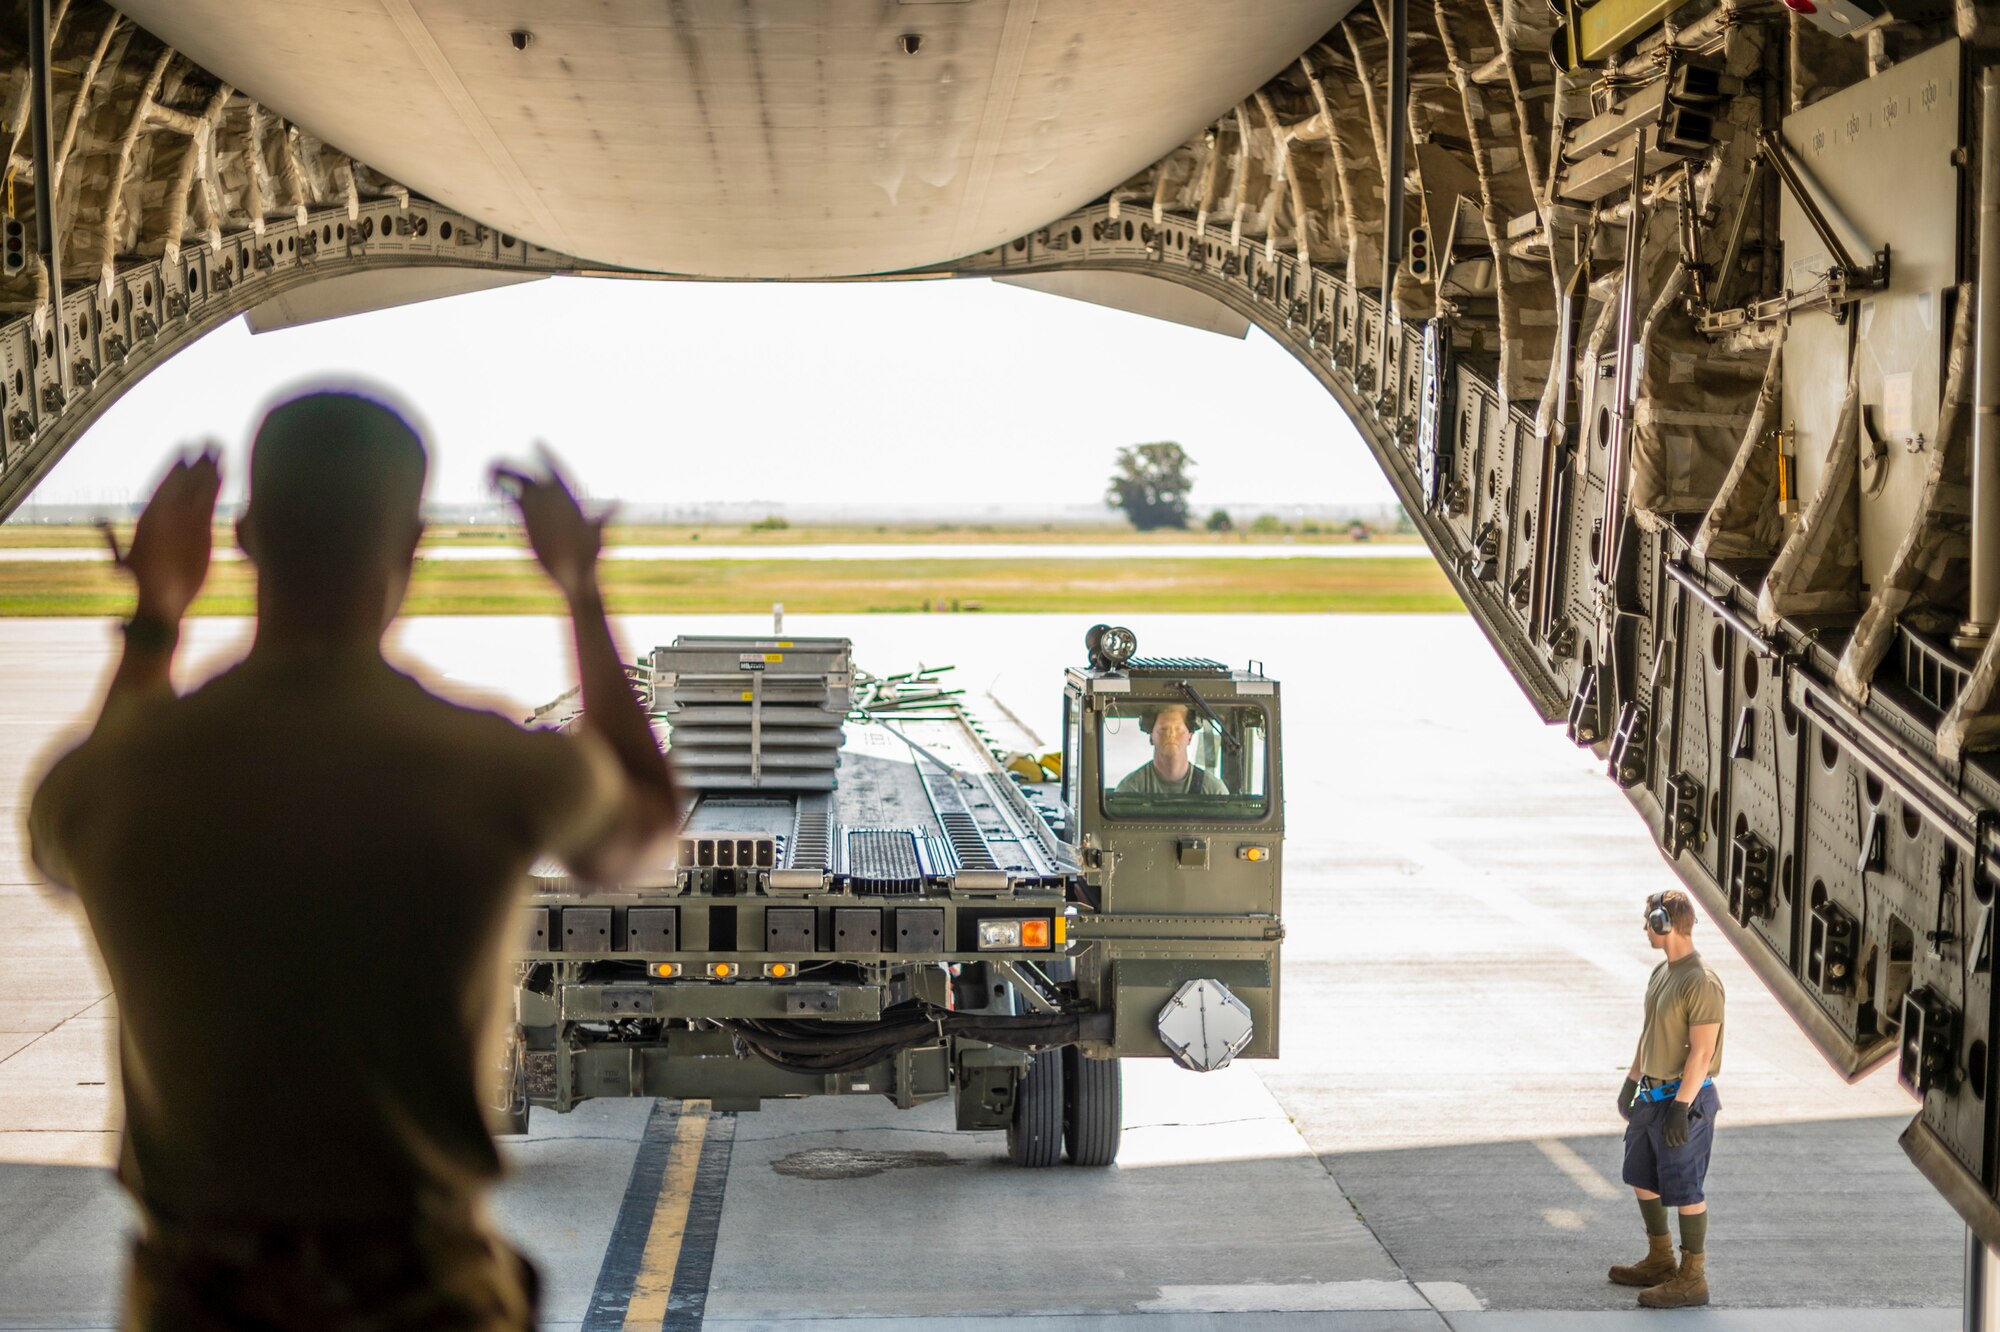 A man gestures to a large military vehicle that is used to load pallets on to large military aircraft, in side of a C-17 Globemaster III, a large Air Force aircraft.